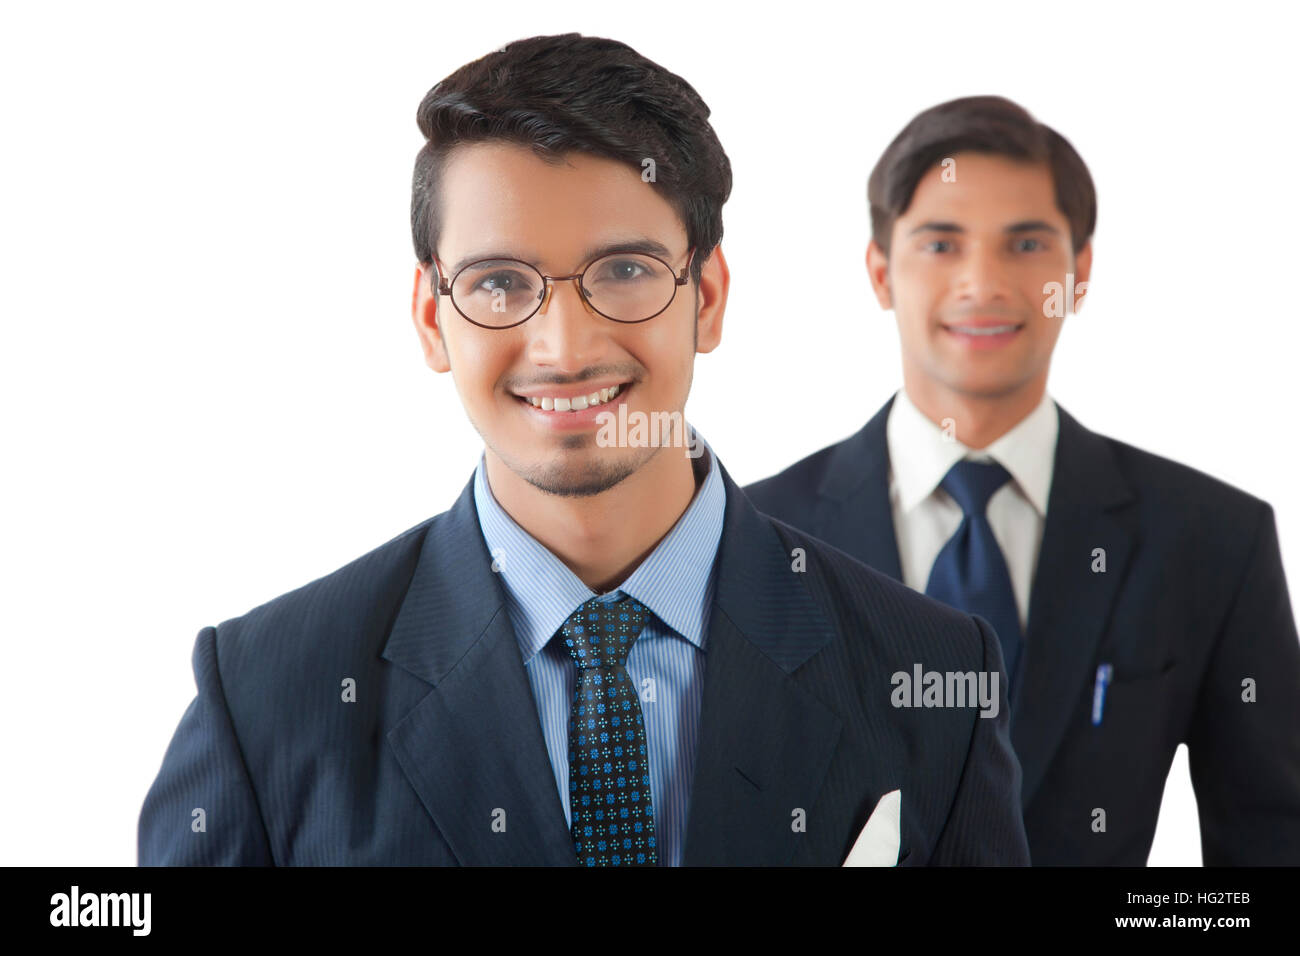 Two smiling young professional men standing against white background Stock Photo